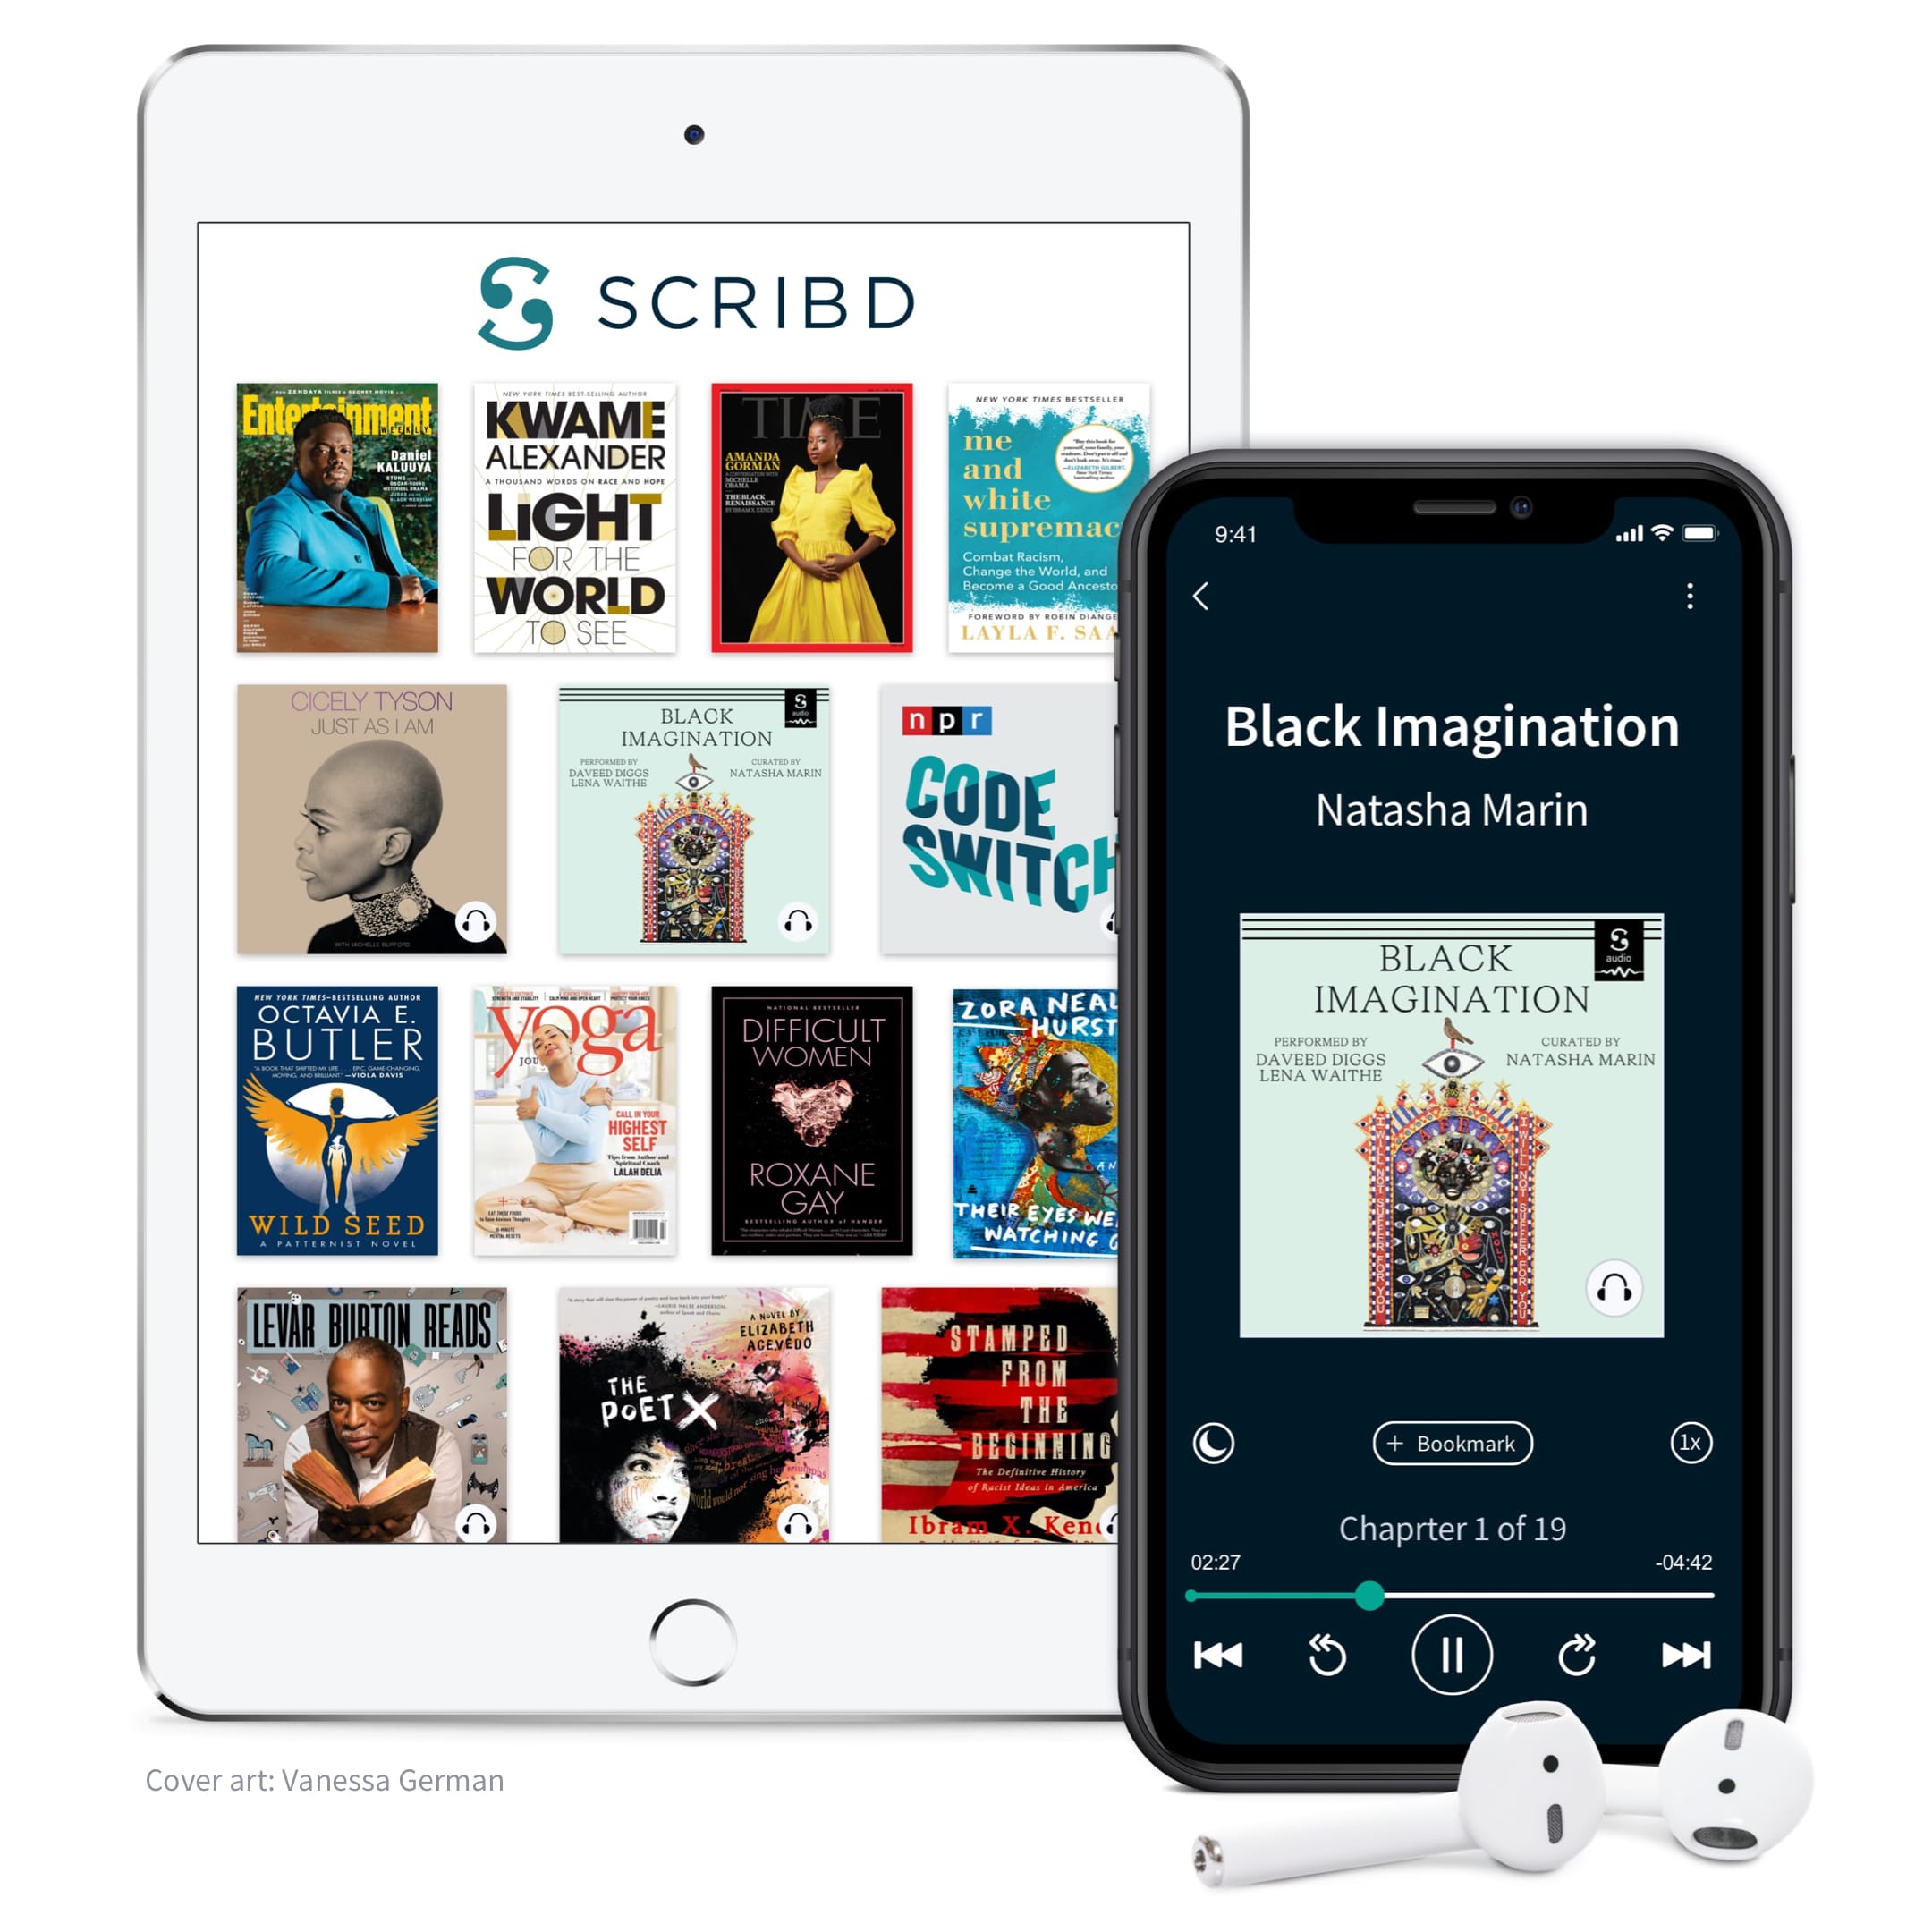 Scribd Audio Launches with 40 Titles (Plus Lena Waithe and Daveed Diggs)